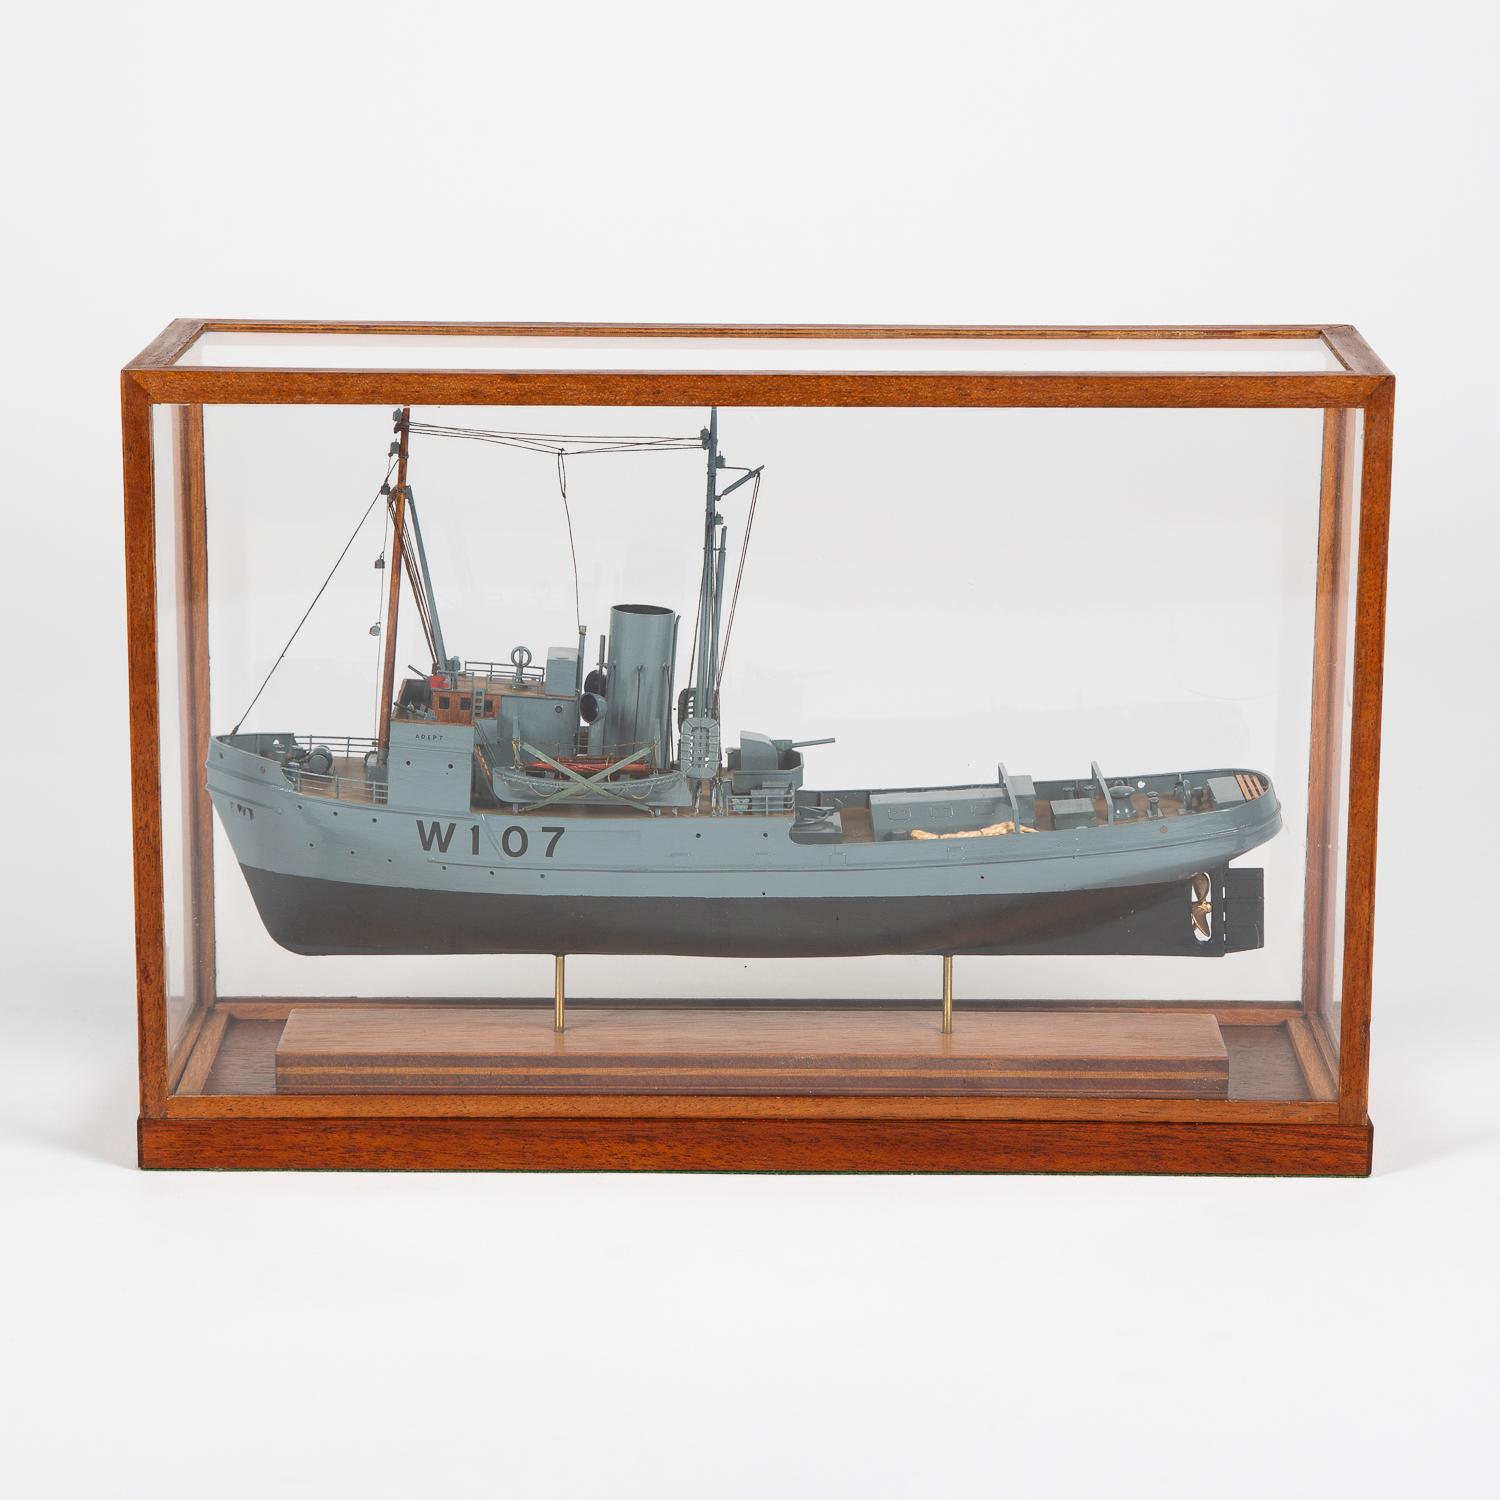 A scale model of the WWII Royal Navy Assurance class Admiralty tug HMS 'Adept' (W107).

The model of HMS Adept is fully rigged with aerial masts over bridge with binnacle, forward guns and rear Bofors gun midships, davits with lifeboats, in WWII